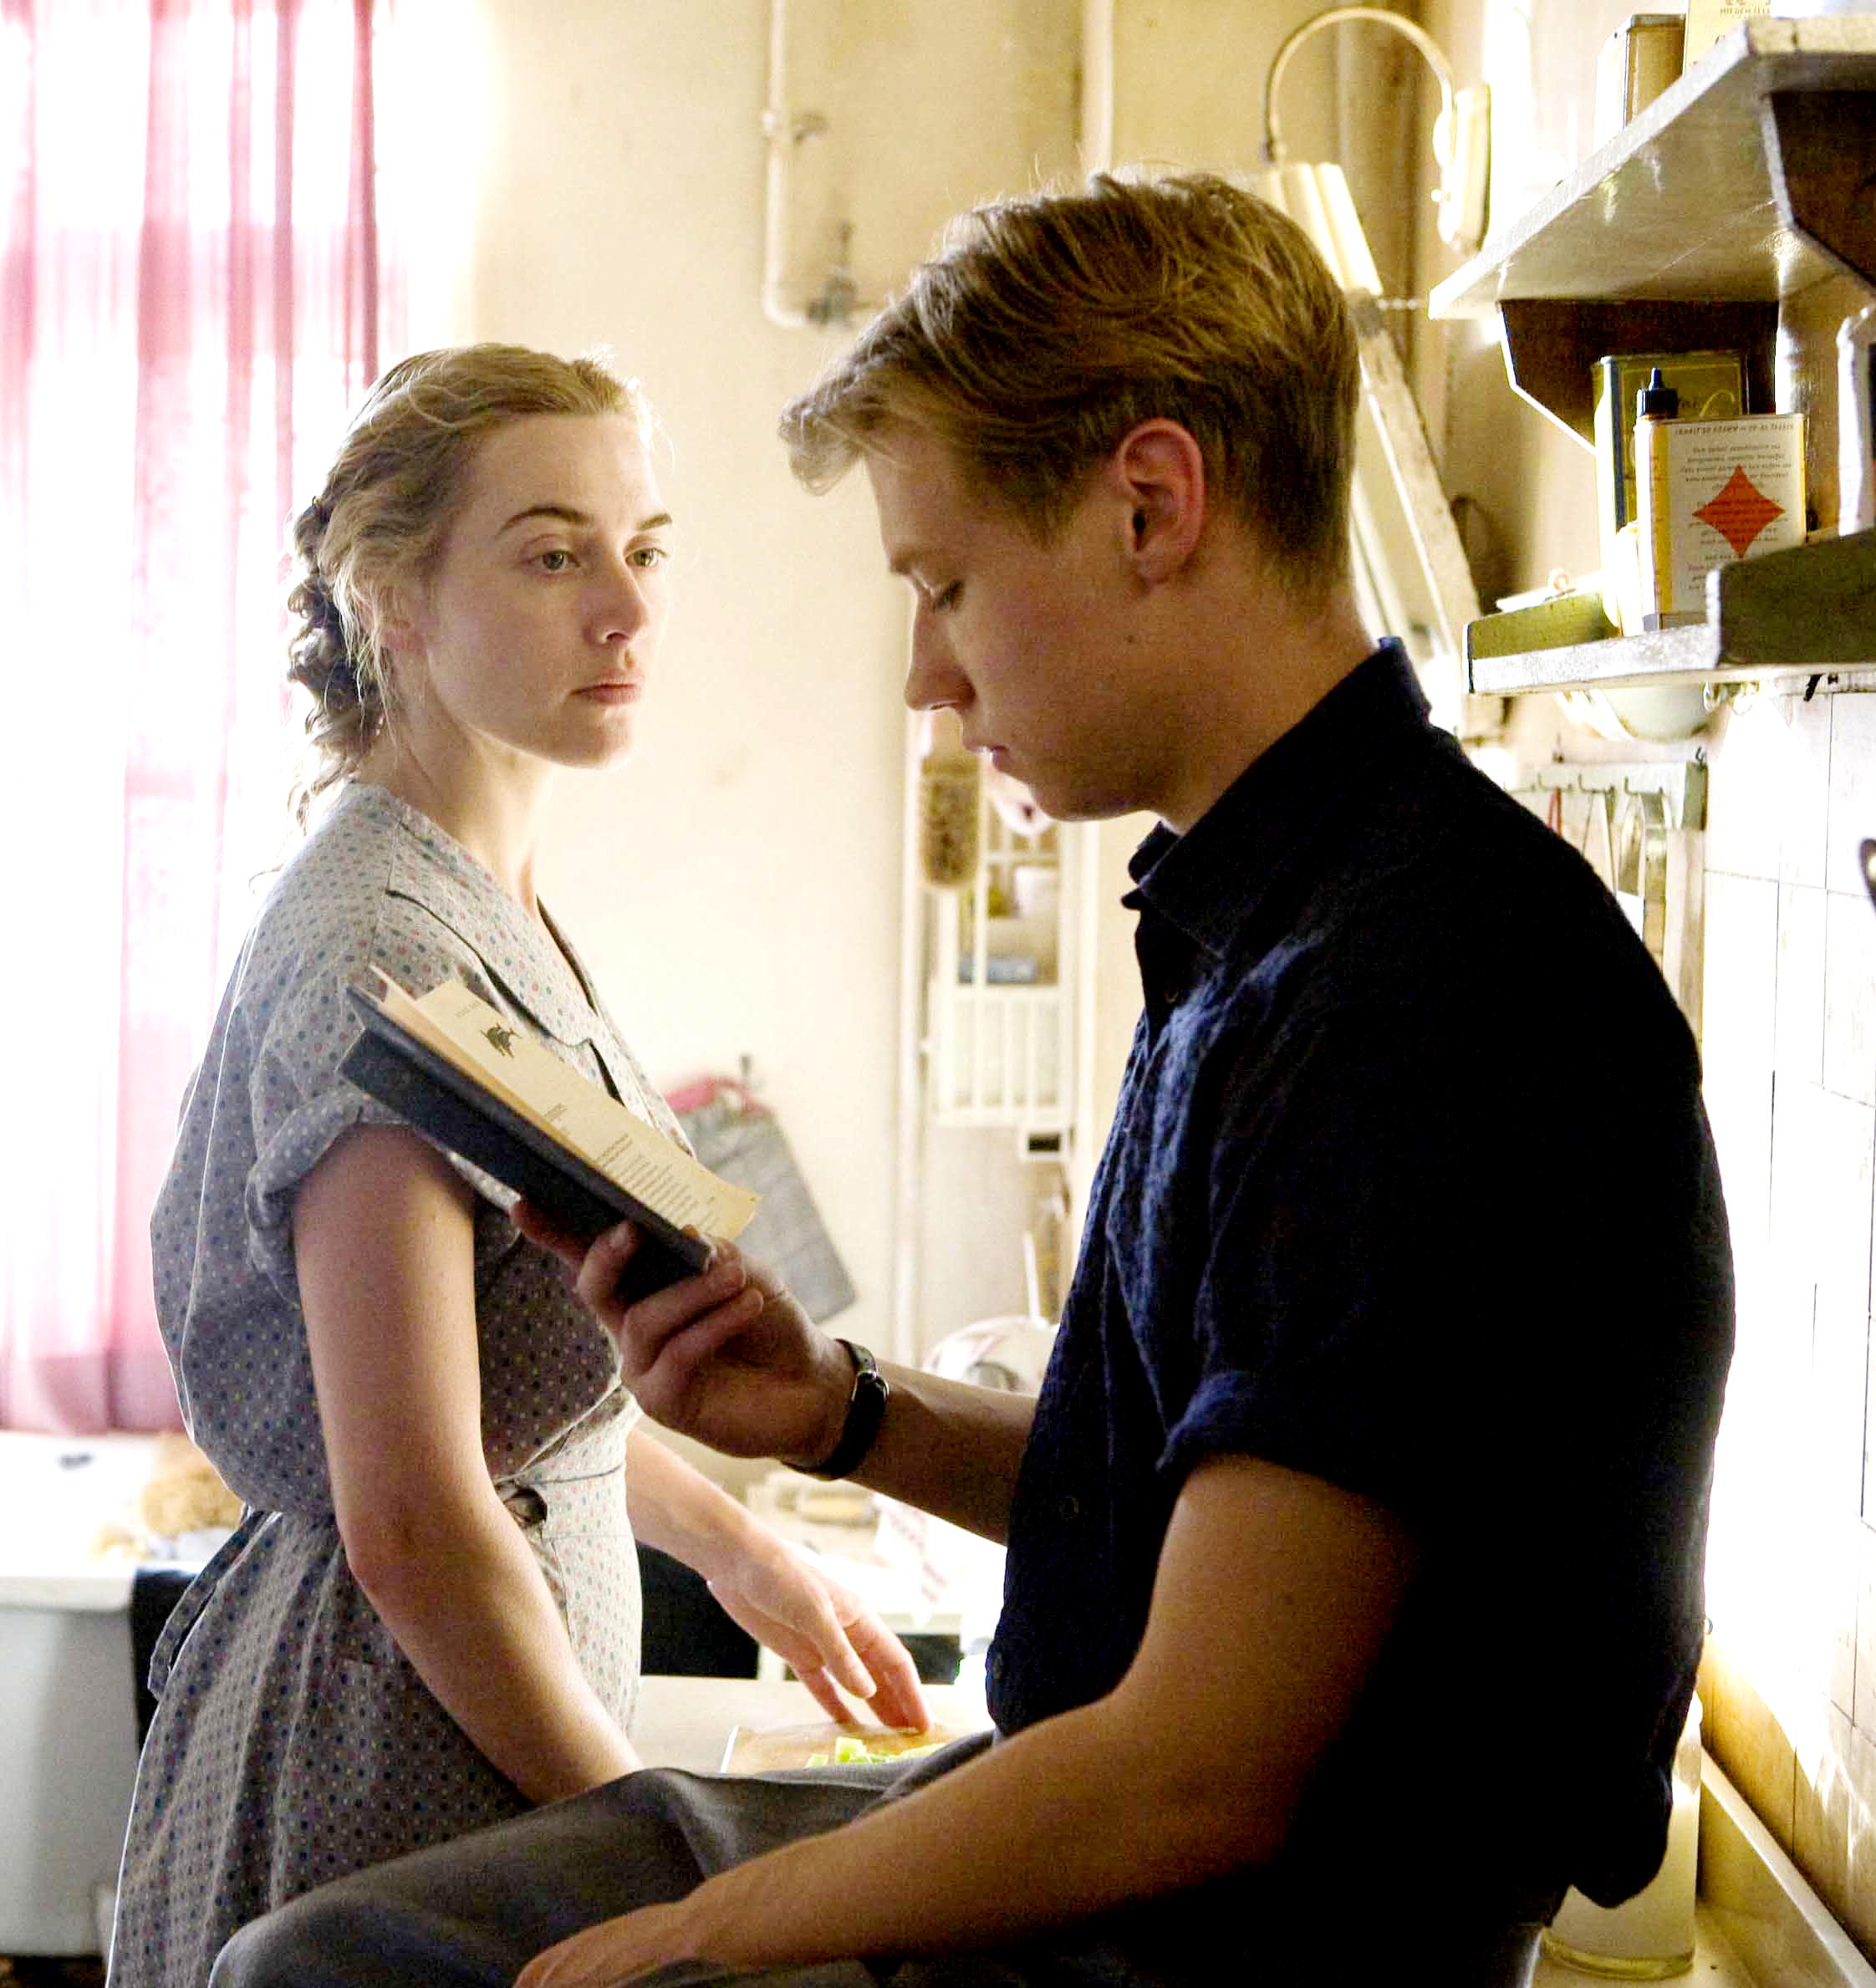 Kate Winslet stars as Hanna Schmitz and David Kross stars as Michael in The Weinstein Company's The Reader (2009). Photo credit by Melinda Sue Gordon.